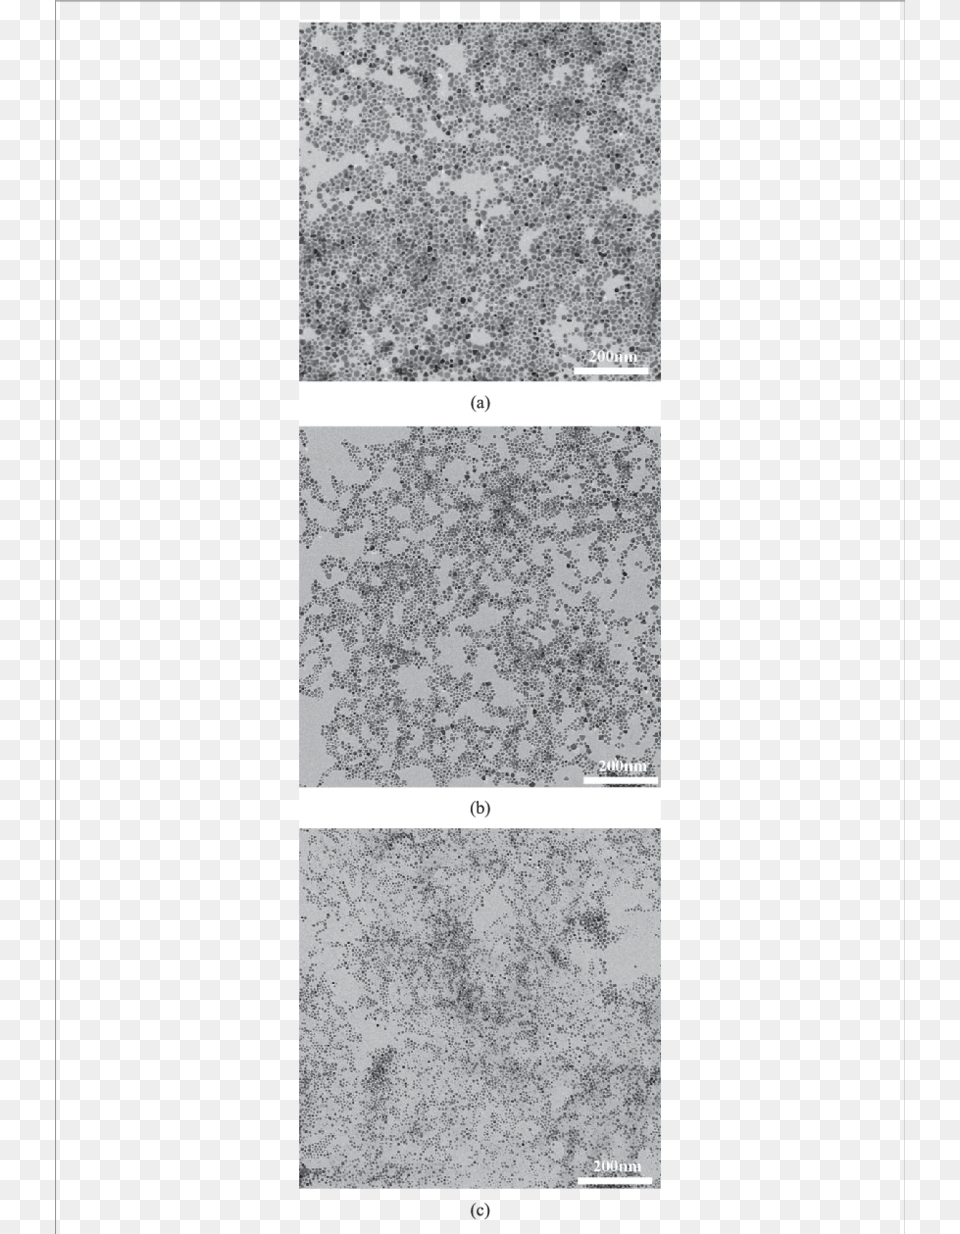 Tem Images Of Gold Nanoparticles For Various Amounts Tile, Art, Collage Png